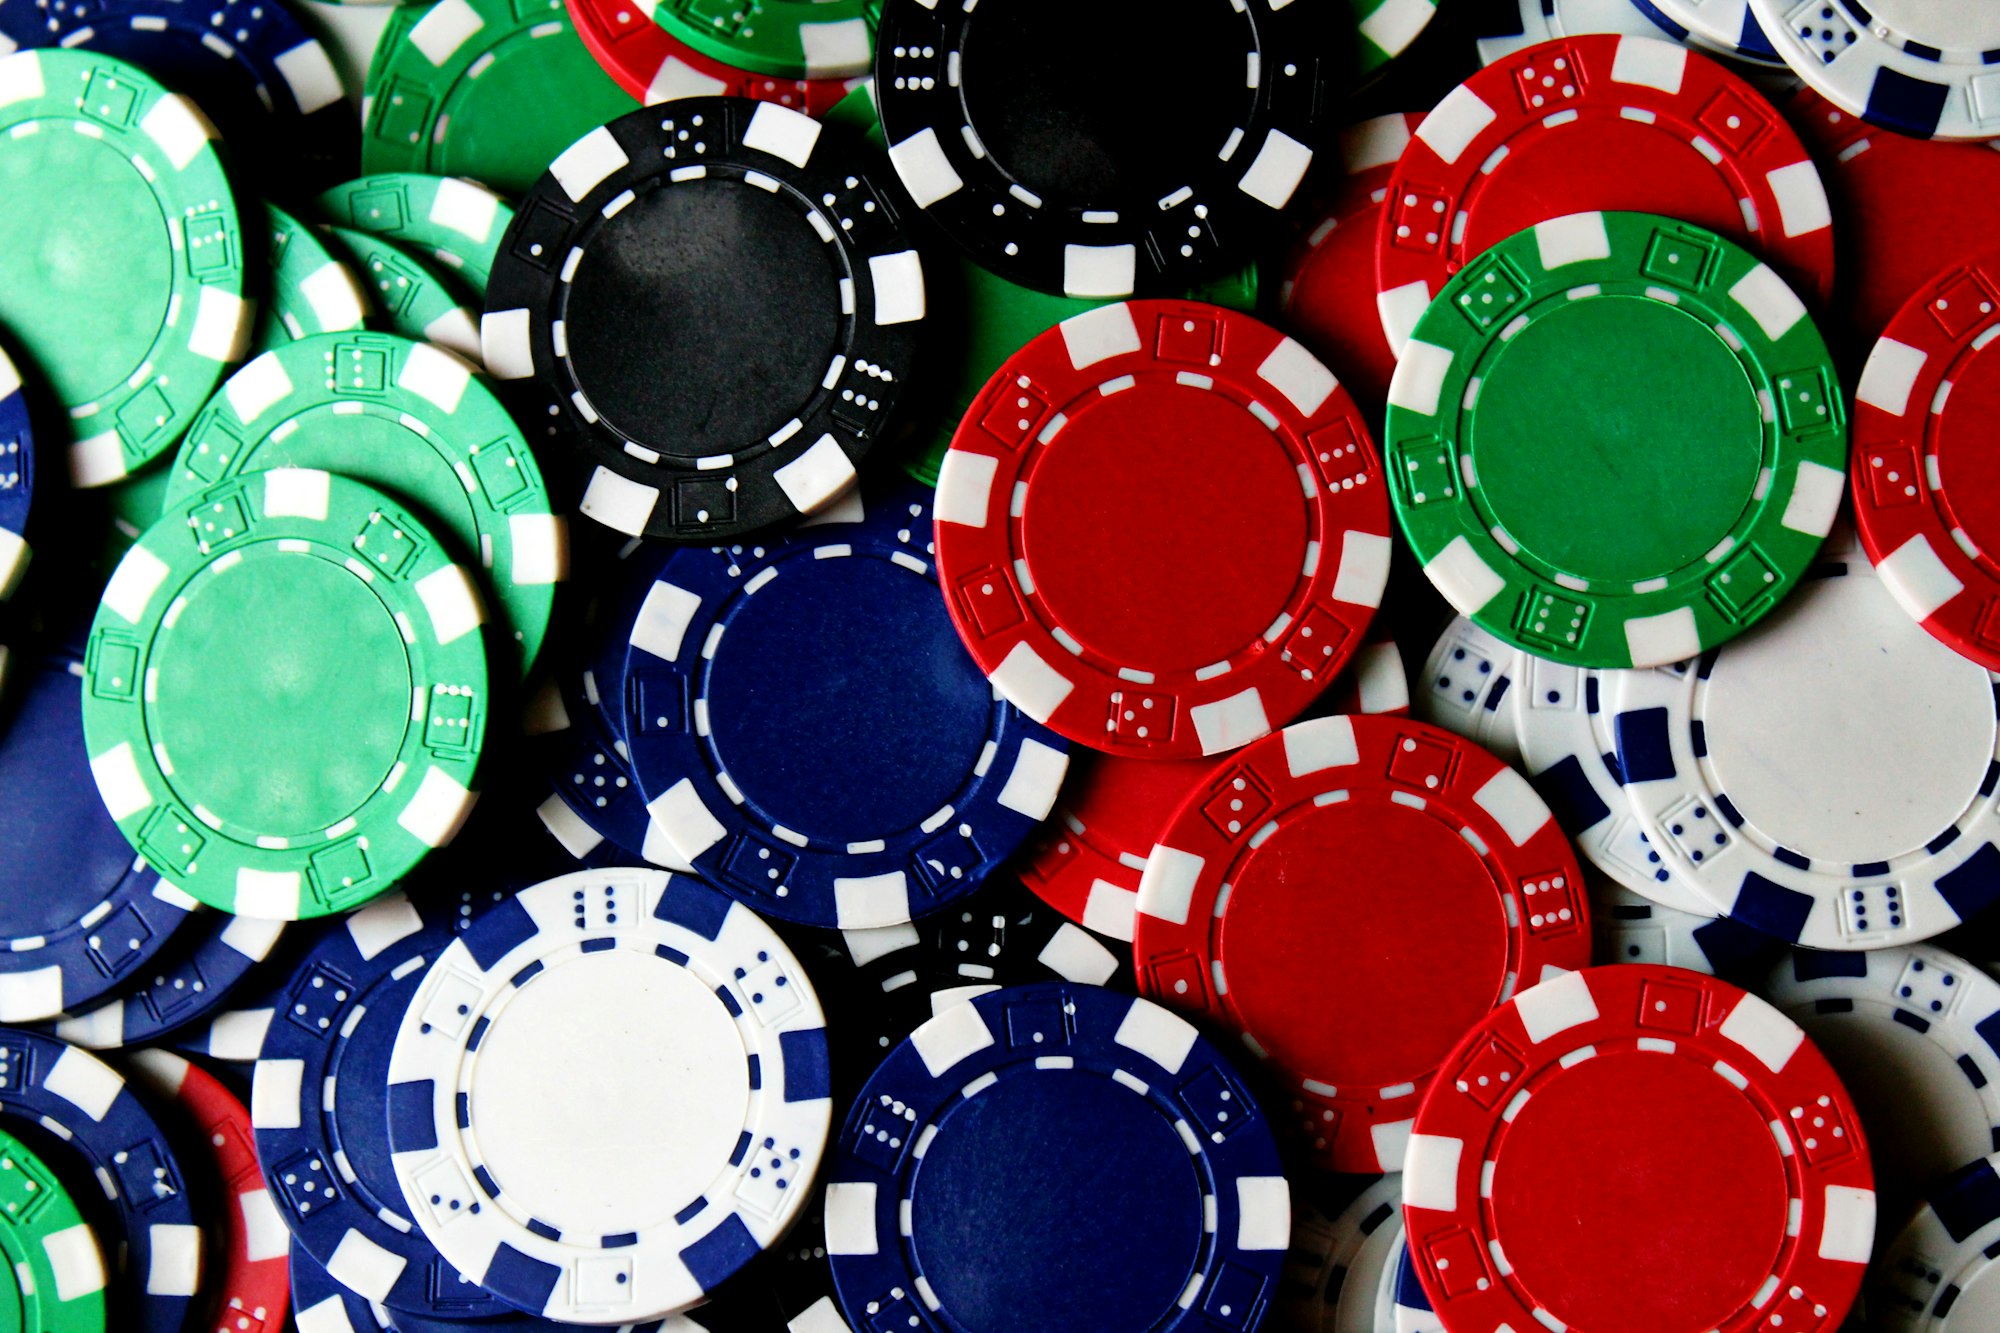 A collection of poker chips in various colors.